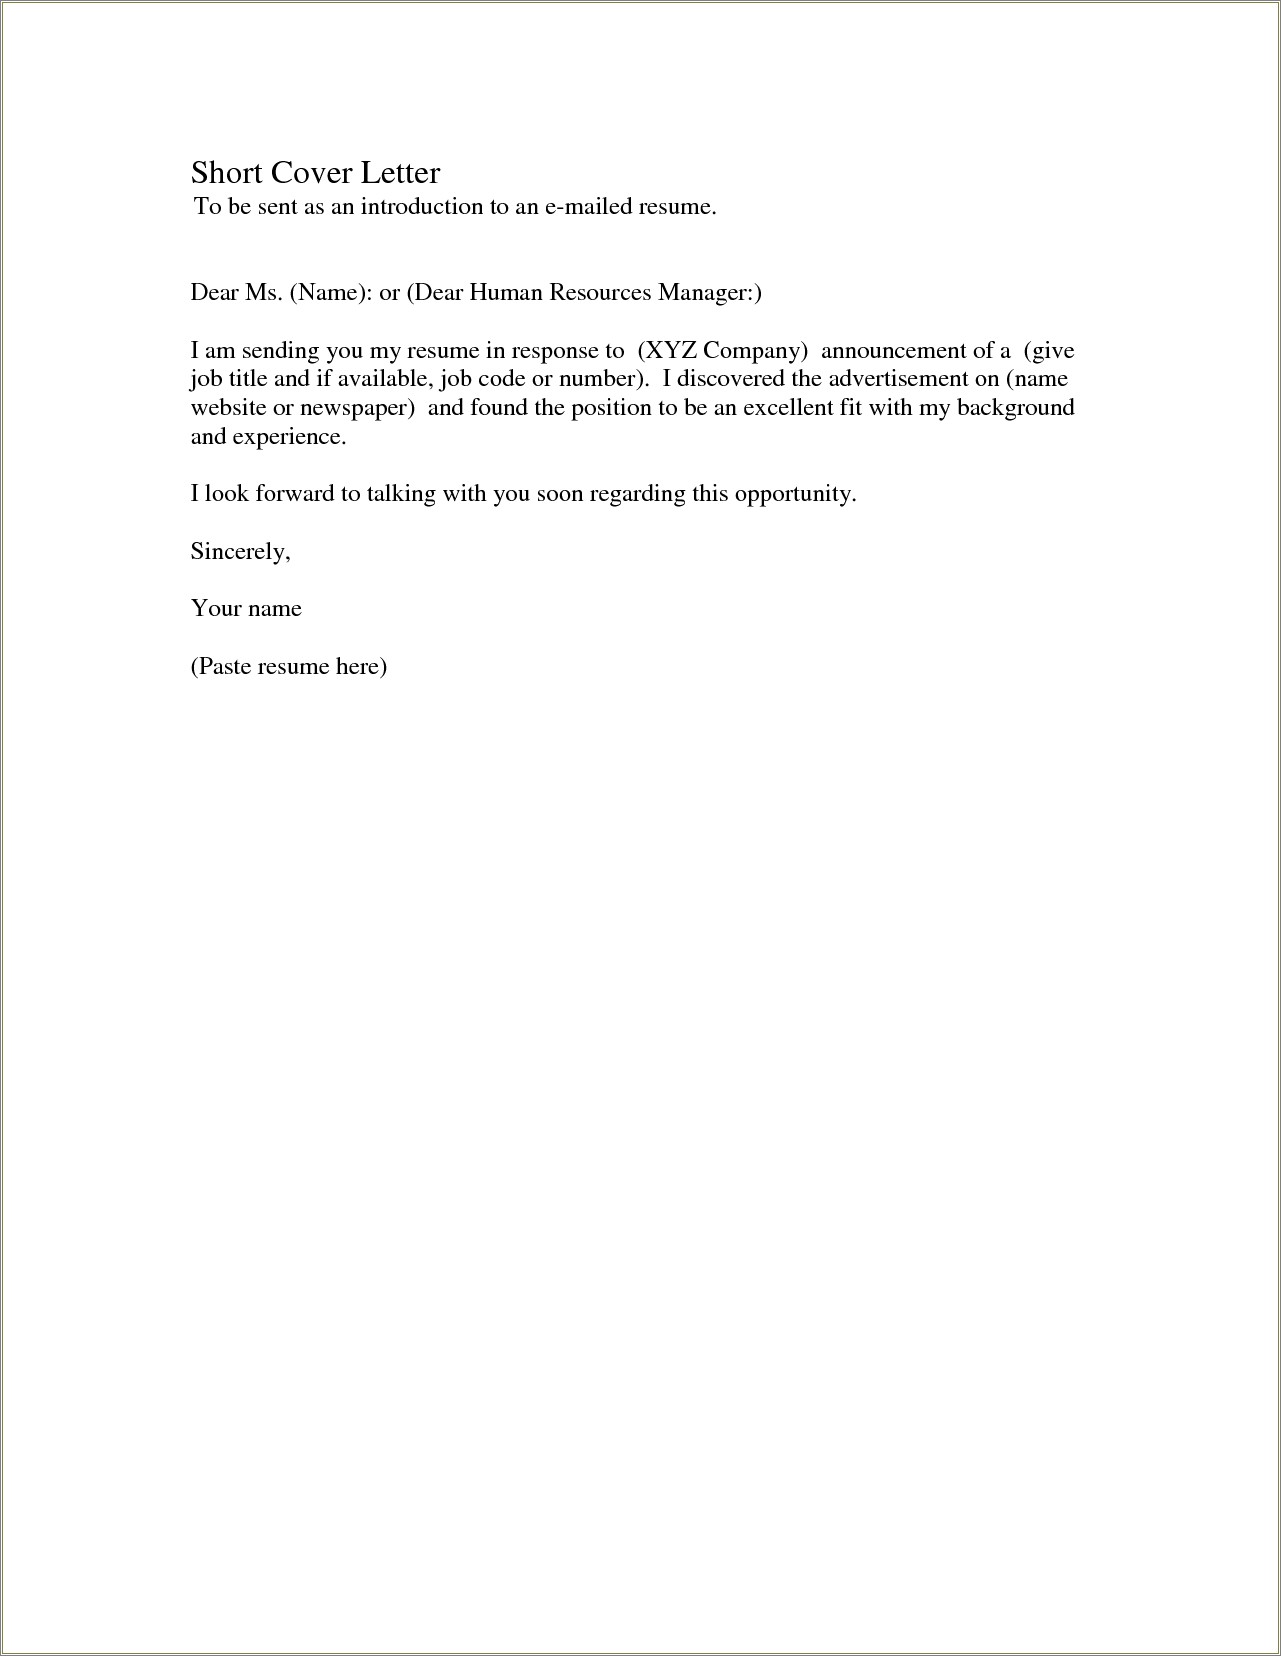 Example Of A Short Cover Letter For Resume